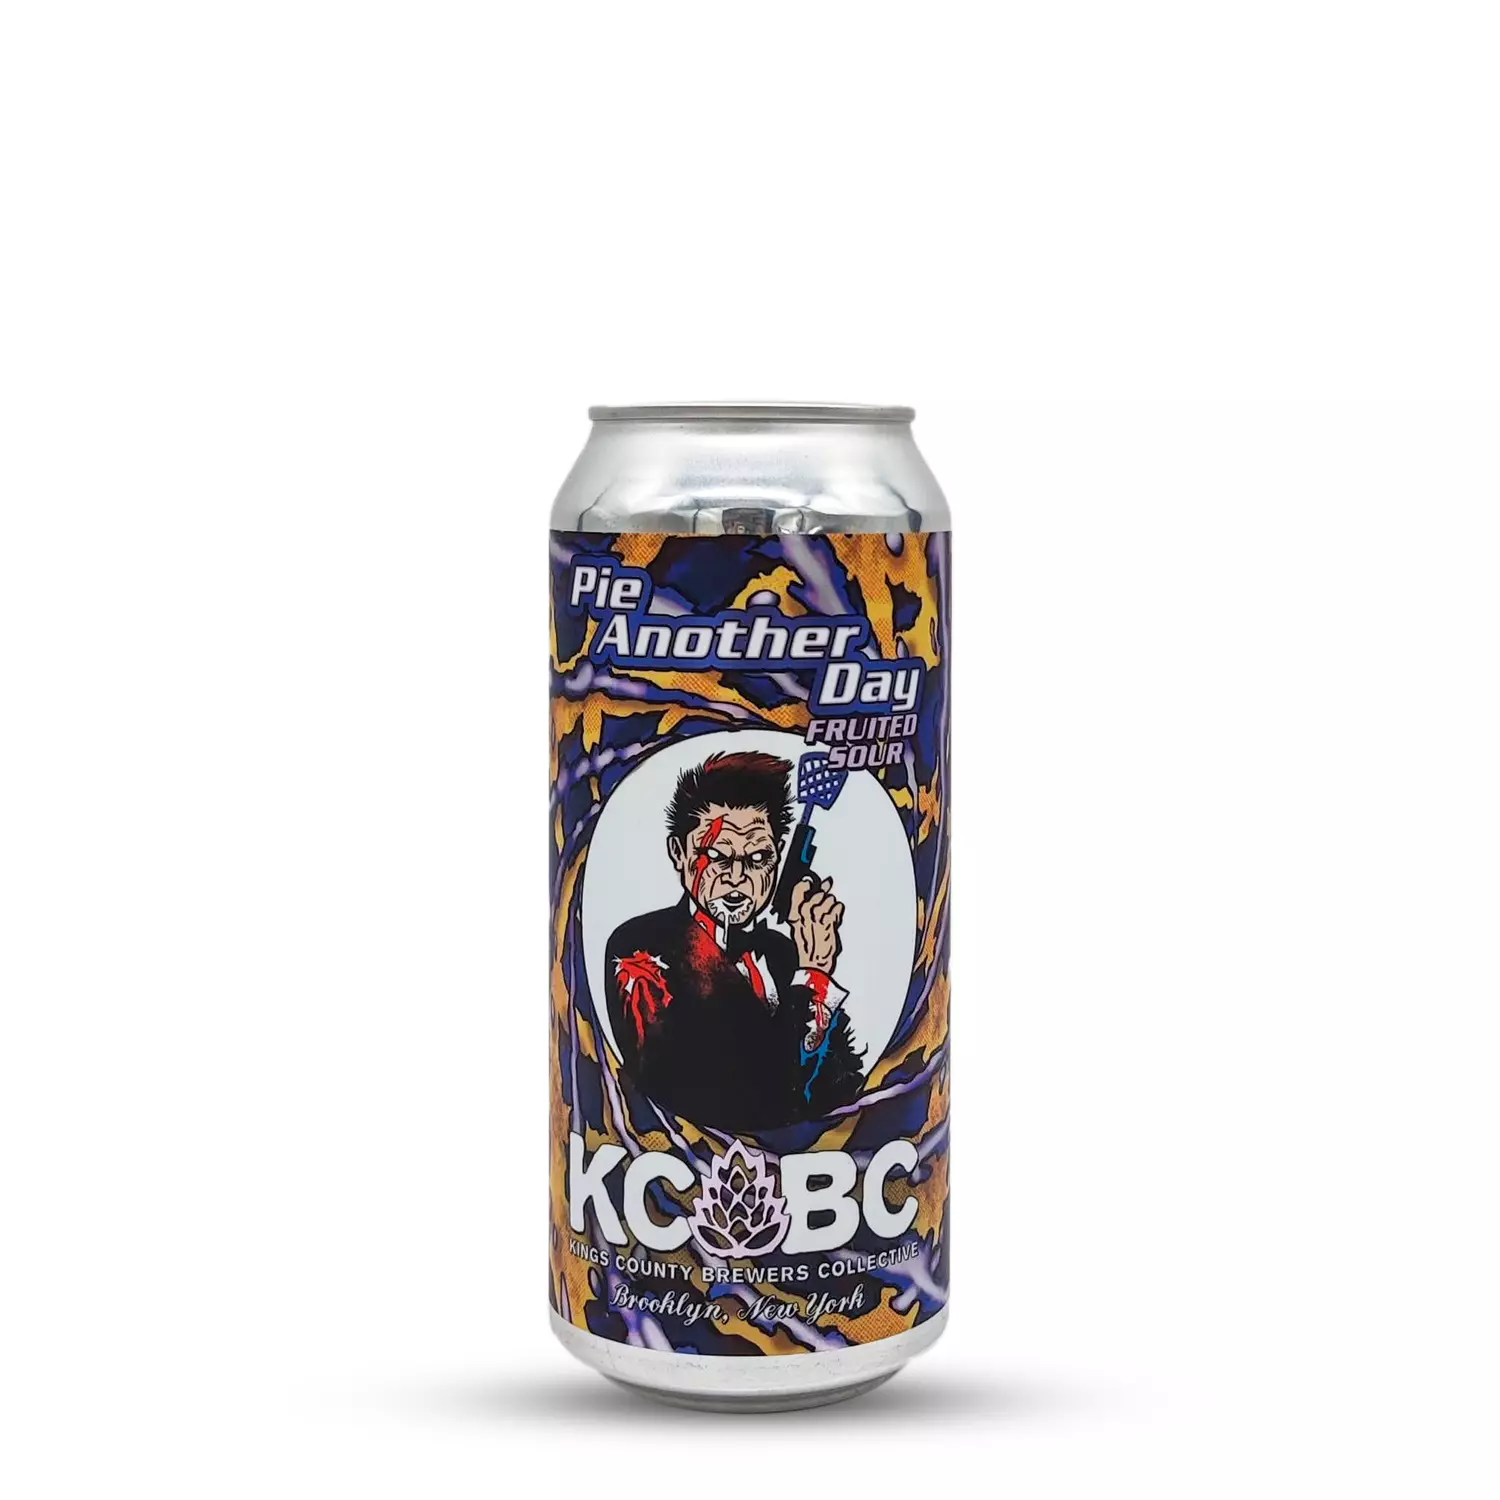 Pie Another Day | KCBC (USA) | 0,473L - 5,5%